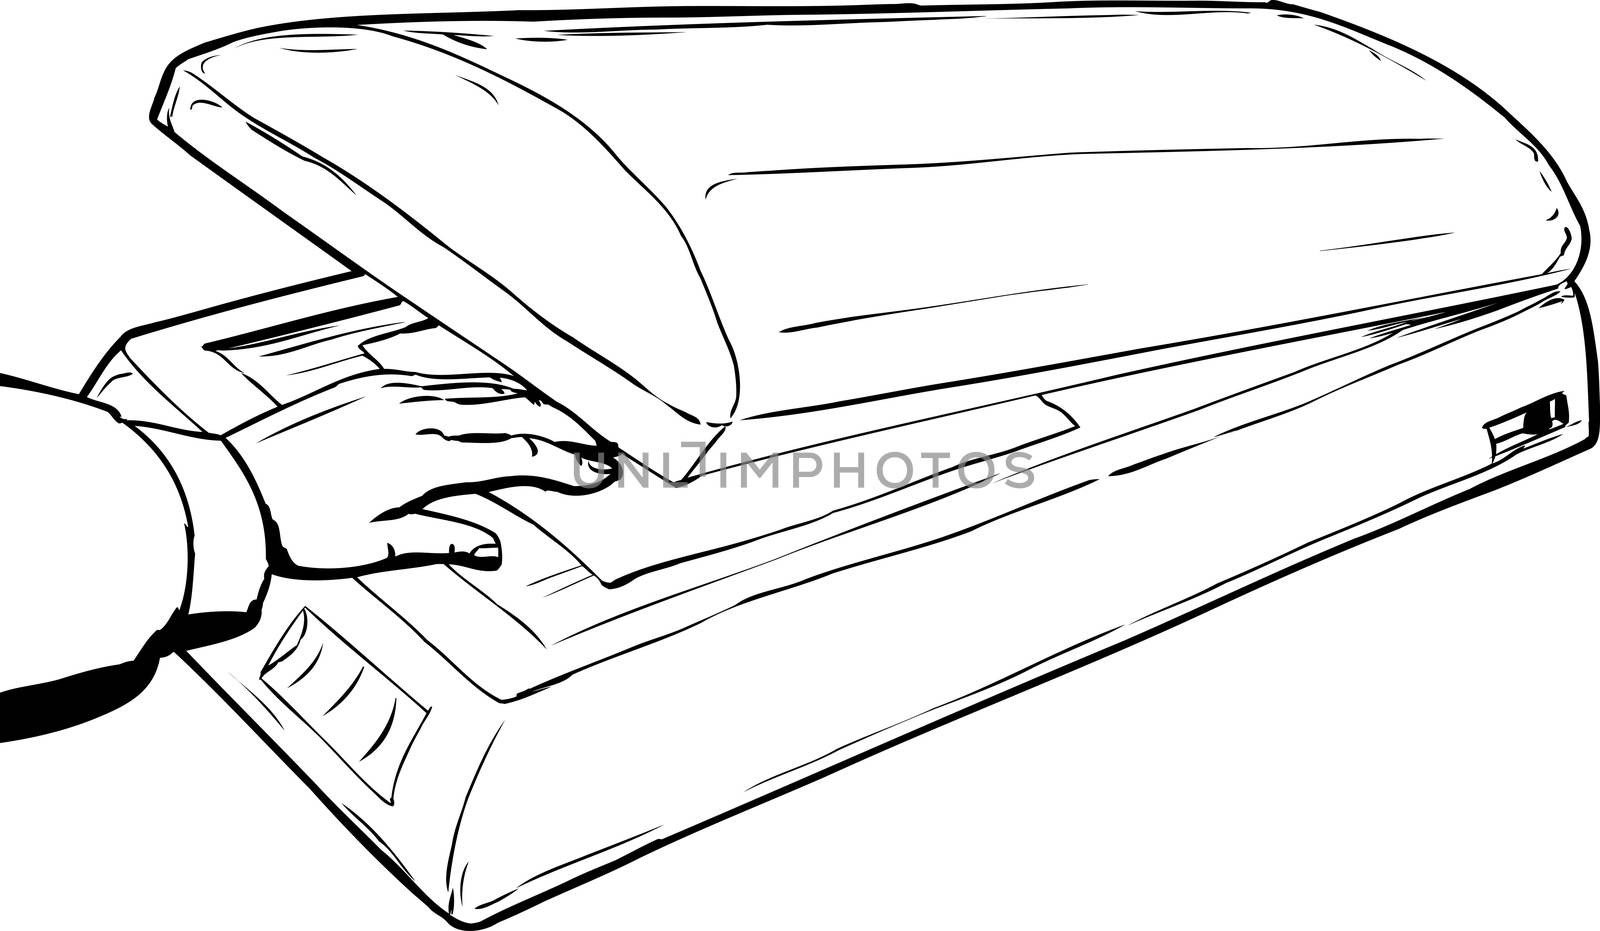 Outlined sketch of hand placing photo or document on glass in flatbed scanner